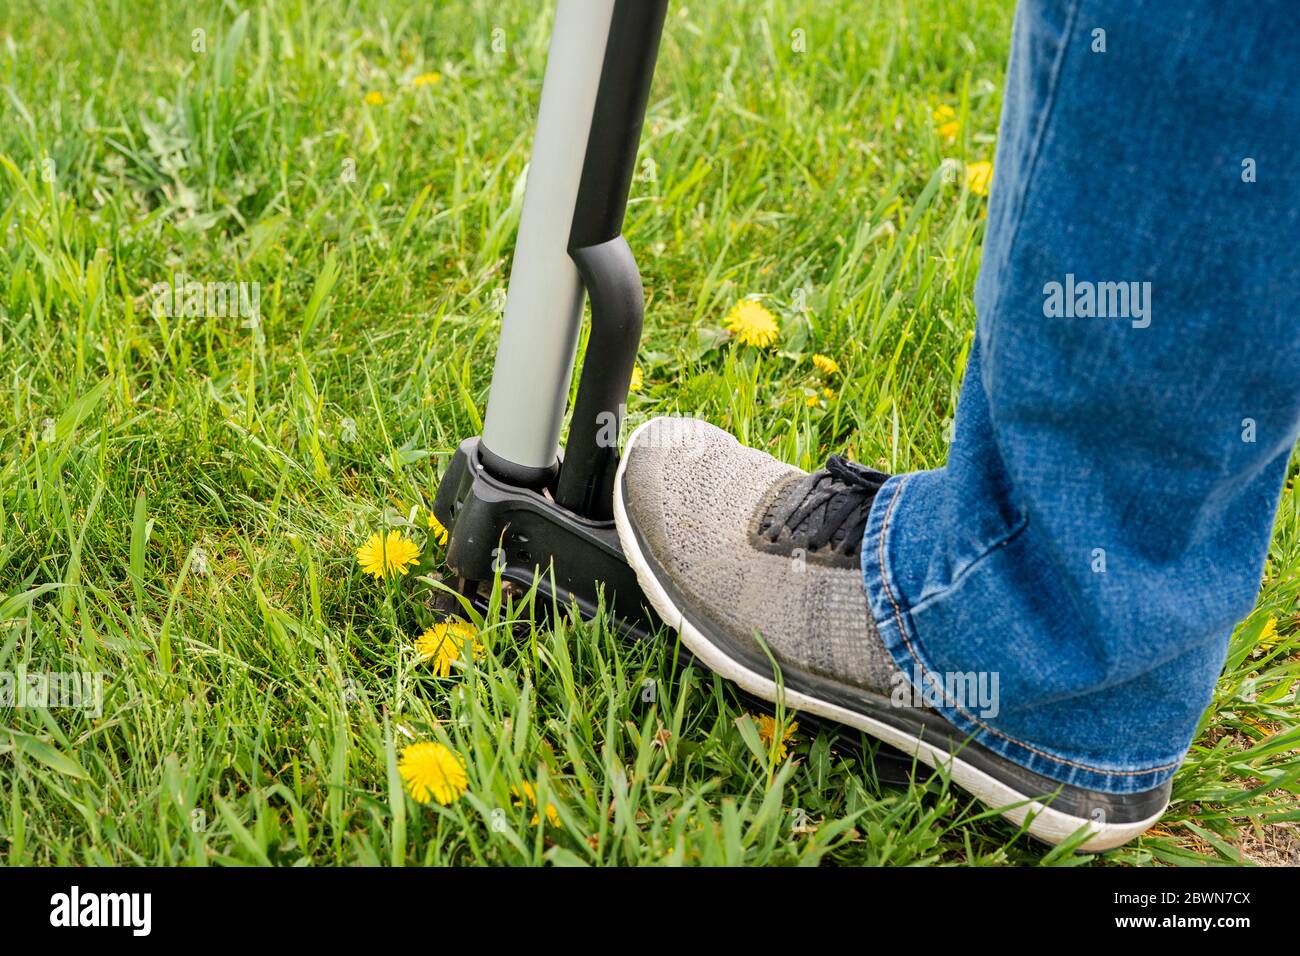 Seasonal yard work, man fighting with dandelions. Device for removing dandelion weeds by pulling the tap root. Weed control. Dandelion removal. Stock Photo